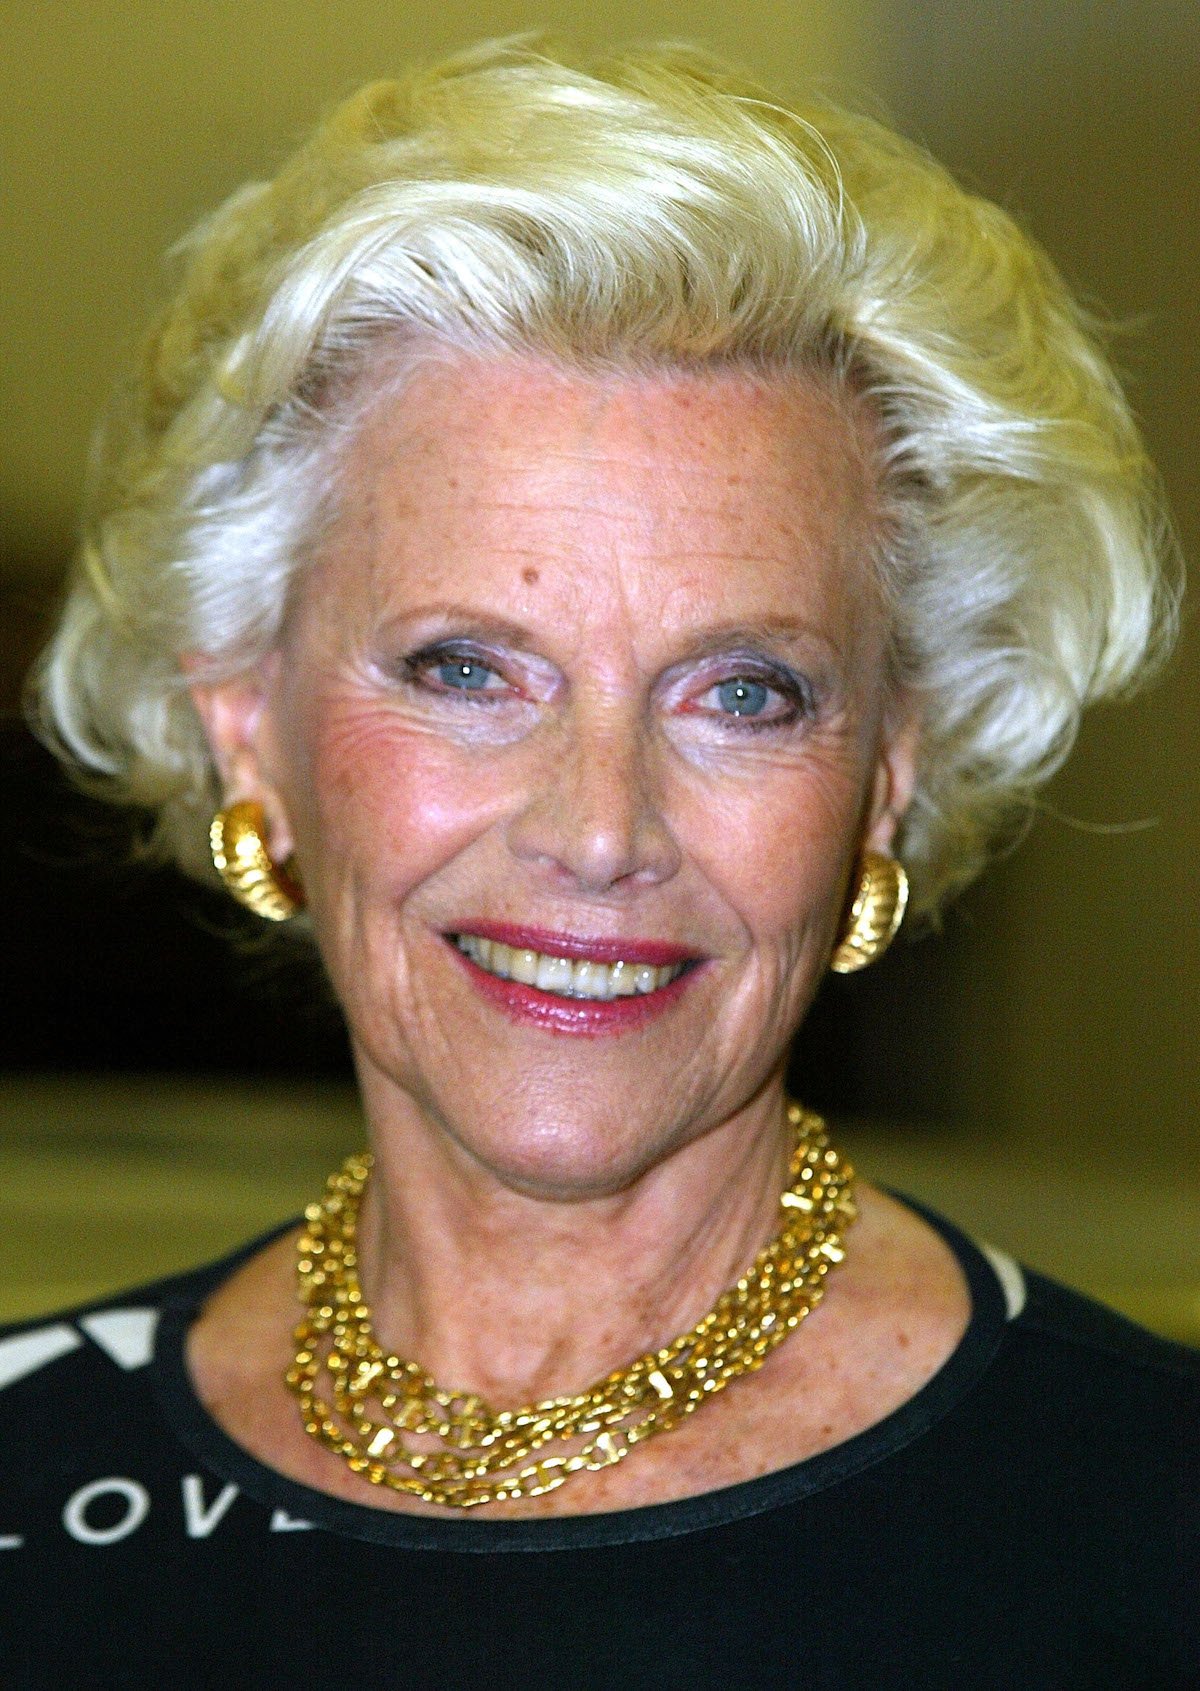 Actress Honor Blackman who played the part of Pussy Galore in the film "Goldfinger" poses for photographers at the Bond, James Bond exhibition October 15, 2002 in London, United Kingdom. The exhibition explores the Bond films through the most extensive collection of original 007 objects, images, concept drawings, storyboards and costume designs ever assembled. (Photo by Scott Barbour/Getty Images)